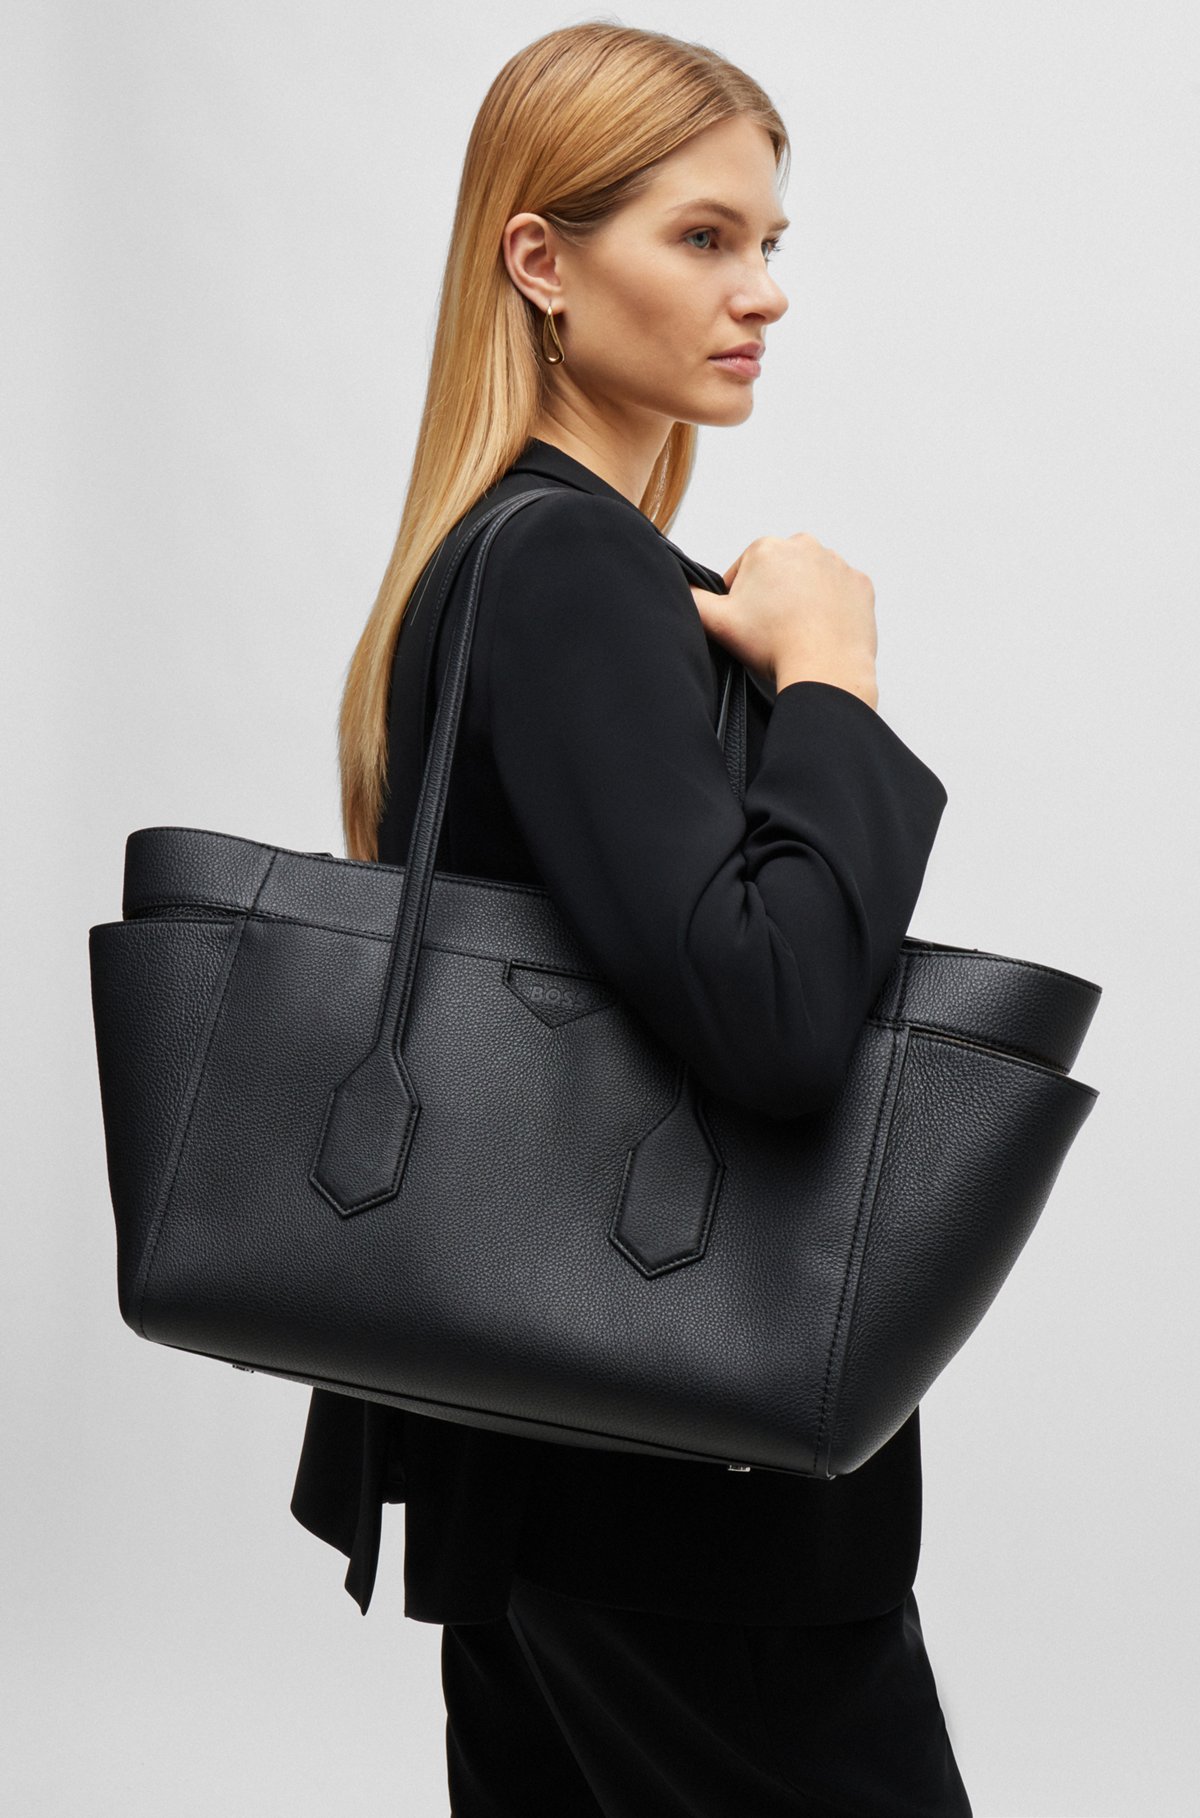 Grained-leather tote bag with logo detail, Black